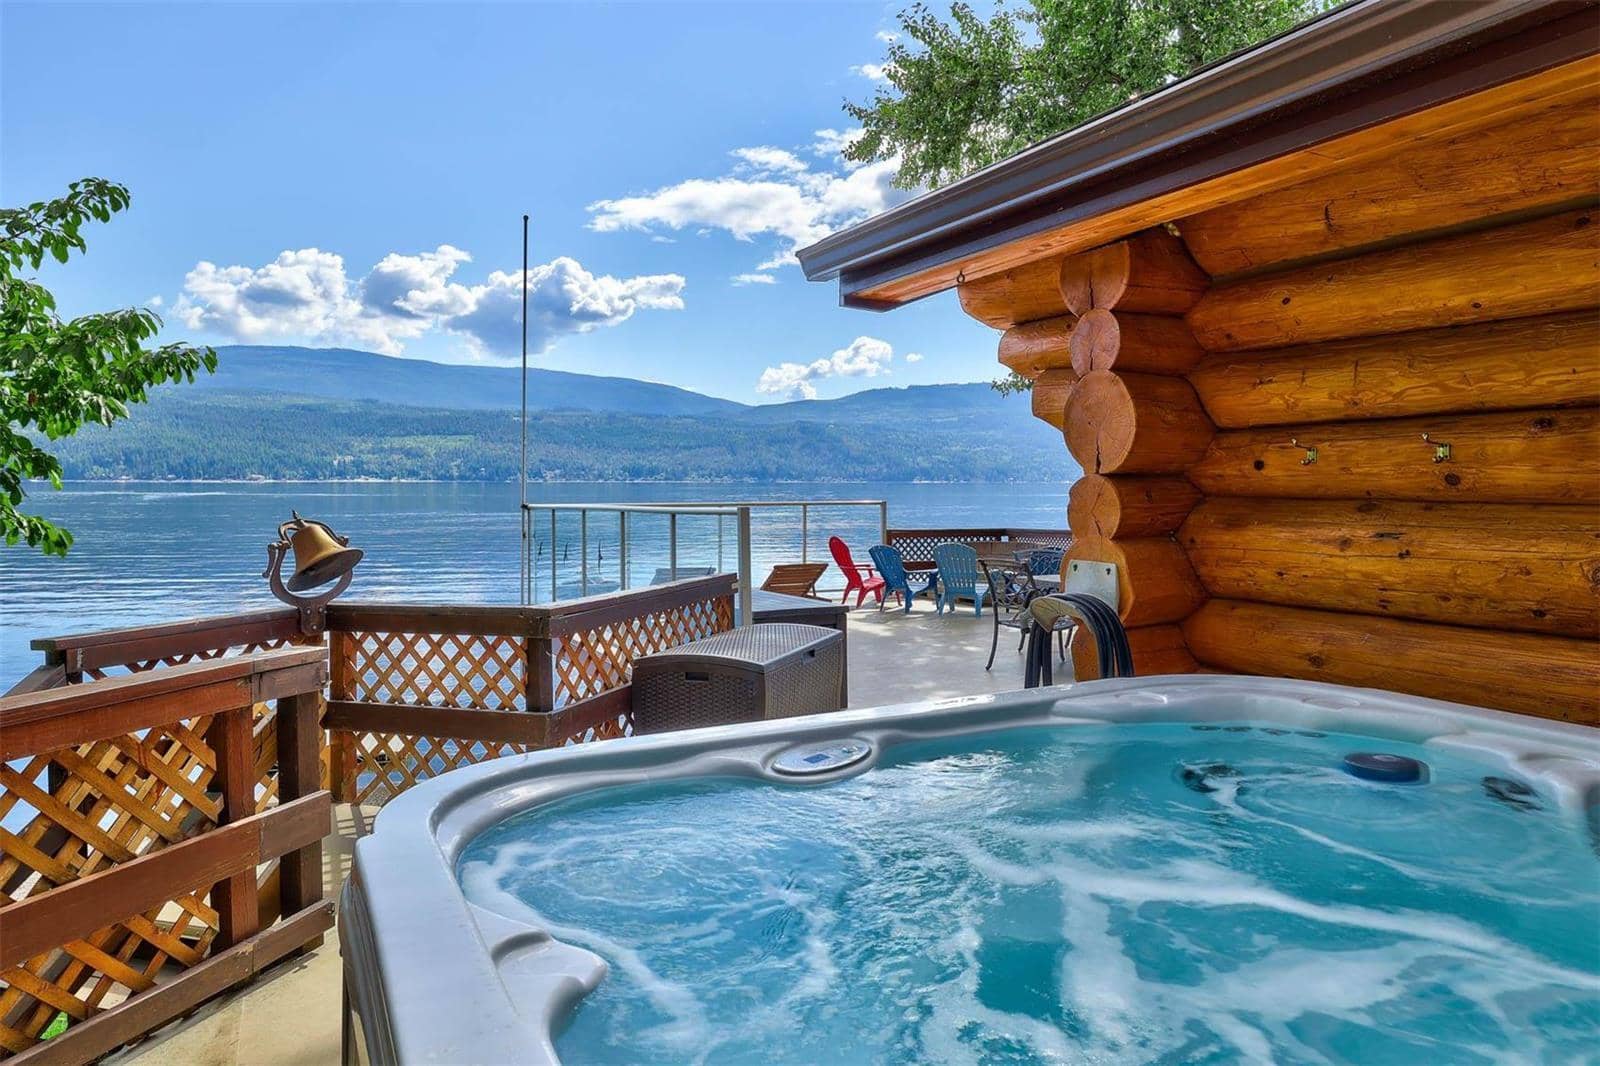 The Bear's Den - Vacation Rentals in BC